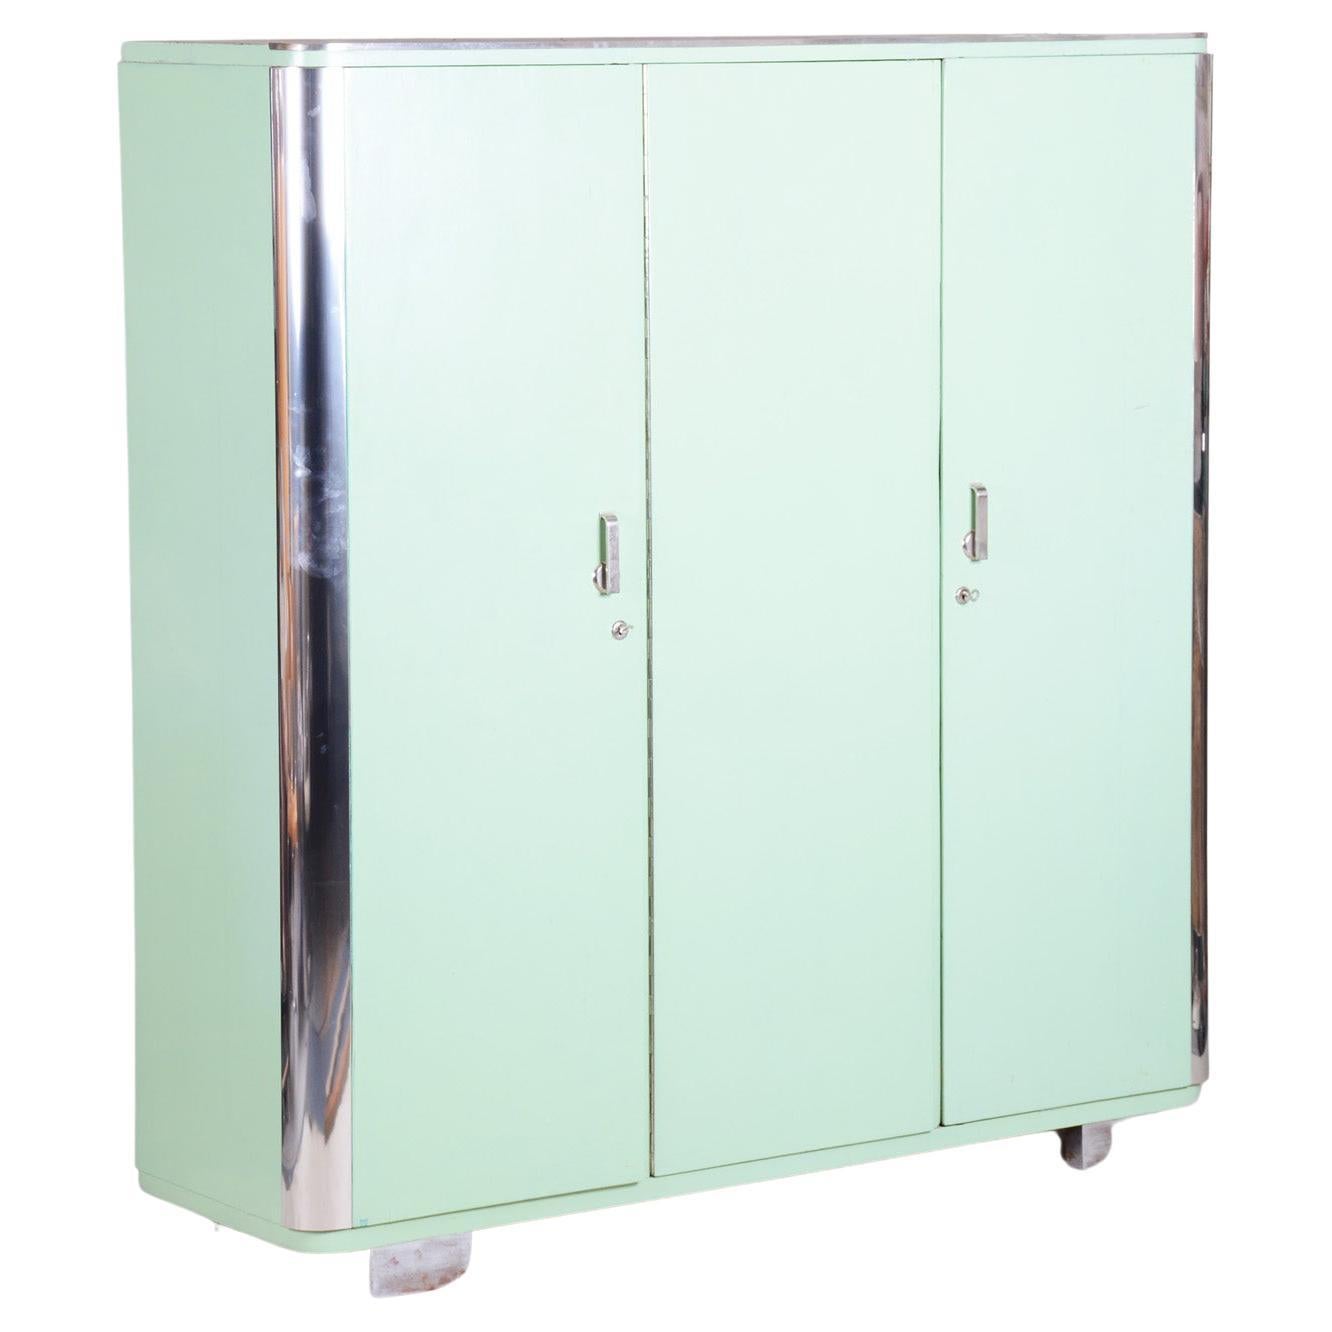 Green Bauhaus Wardrobe Made in 1930s Czechia by Vichr a Spol, Fully Restored